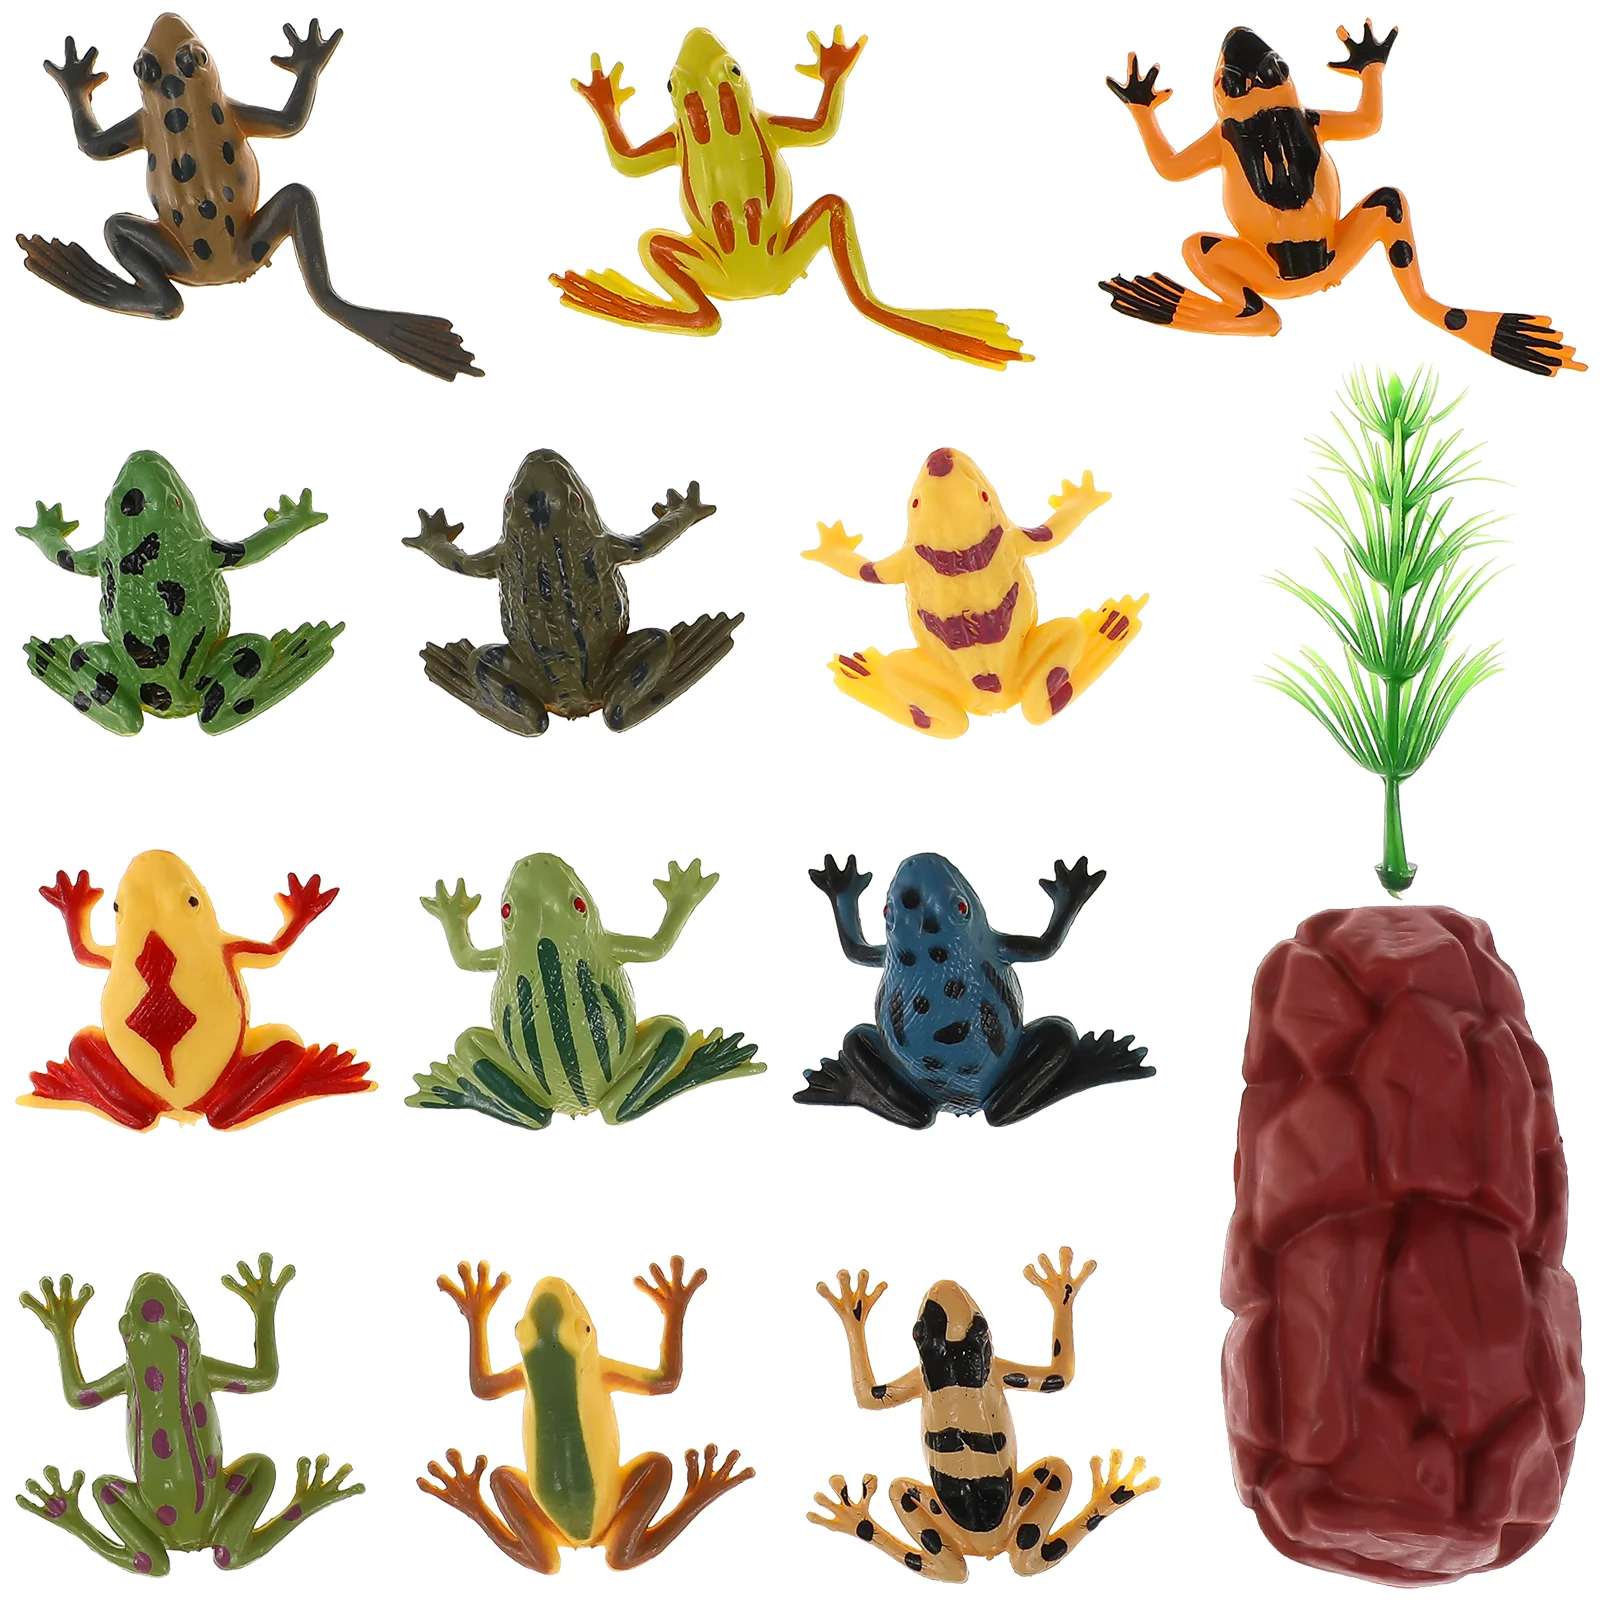 

Frogs Frog Miniature Figurines Tiny Statues Toy Mini Animals Ornaments Rubber Kids Realistic Toys Landscape Fake Models Bulk